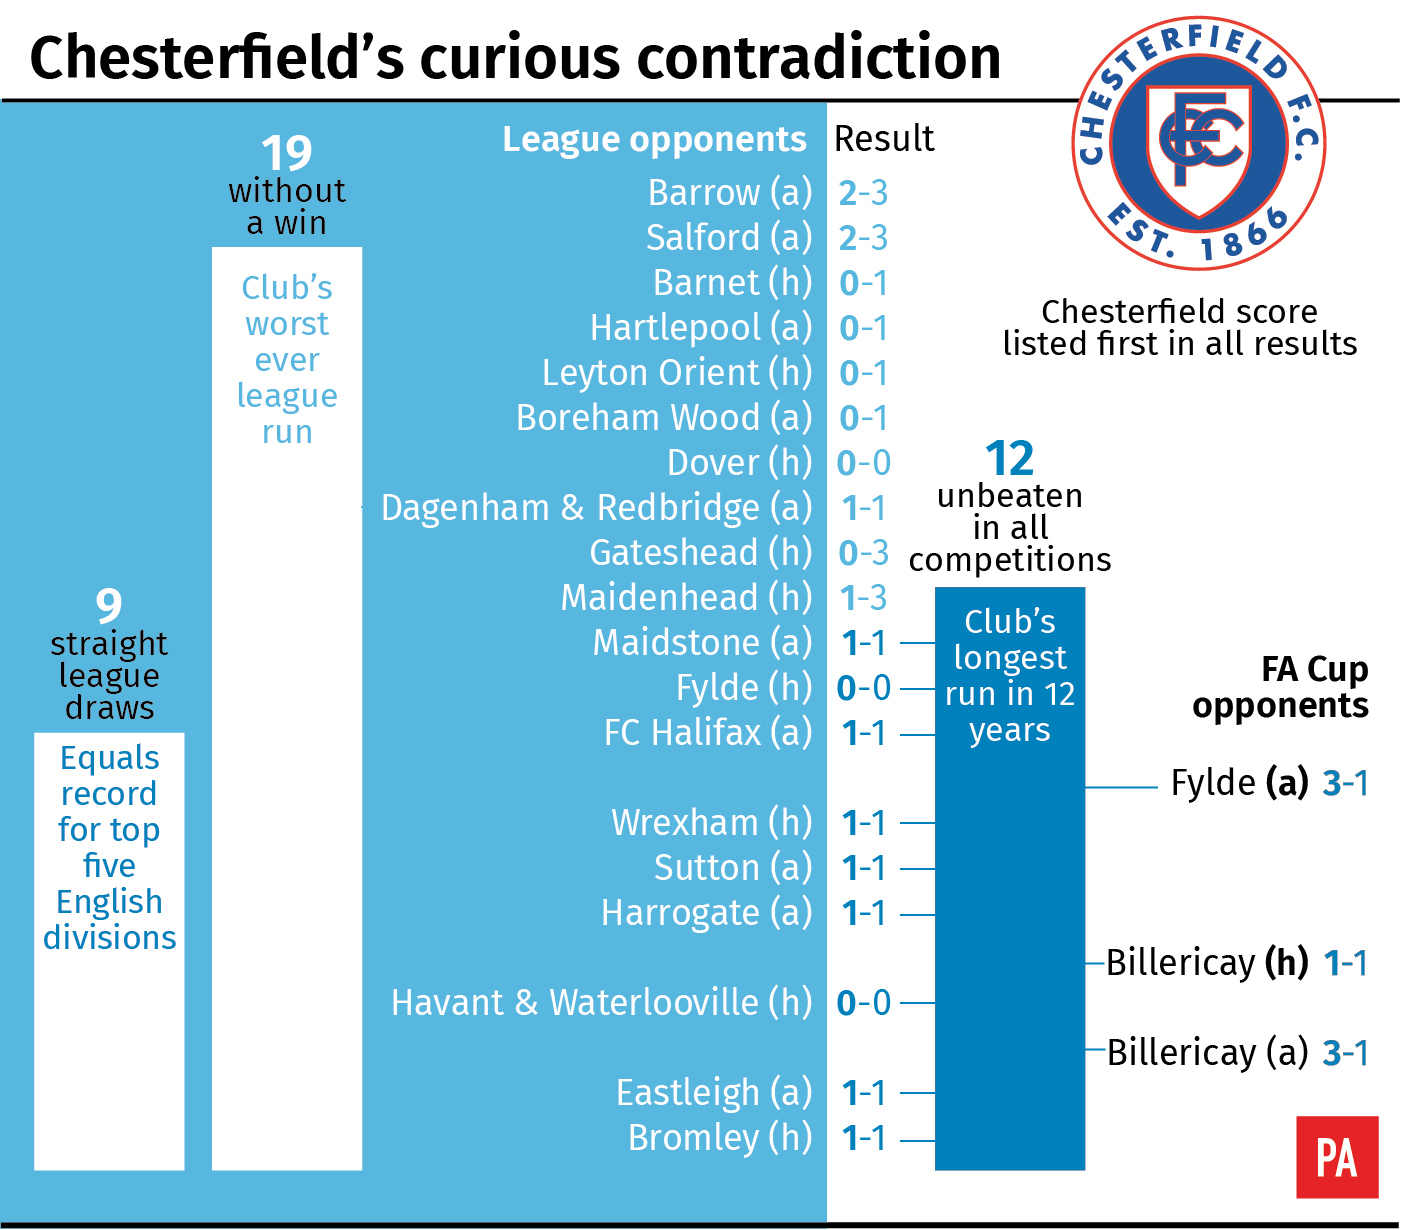 Chesterfield's run of form